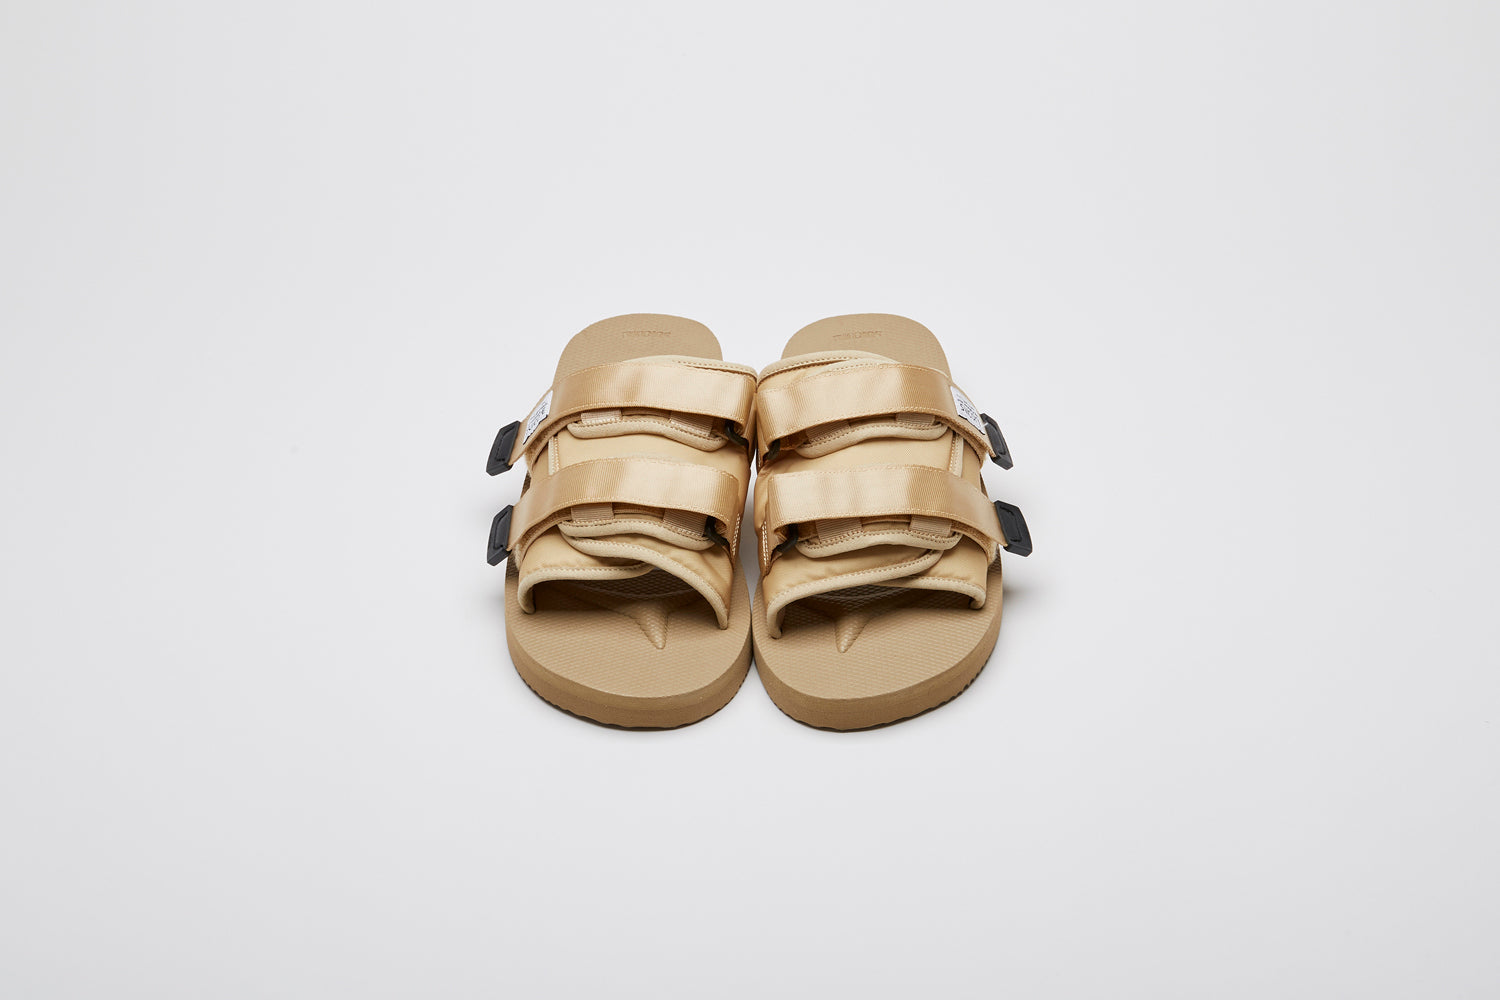 SUICOKE MOTO-Cab slides with beige nylon upper, beige midsole and sole, straps and logo patch. From Spring/Summer 2023 collection on eightywingold Web Store, an official partner of SUICOKE. OG-056CAB BEIGE